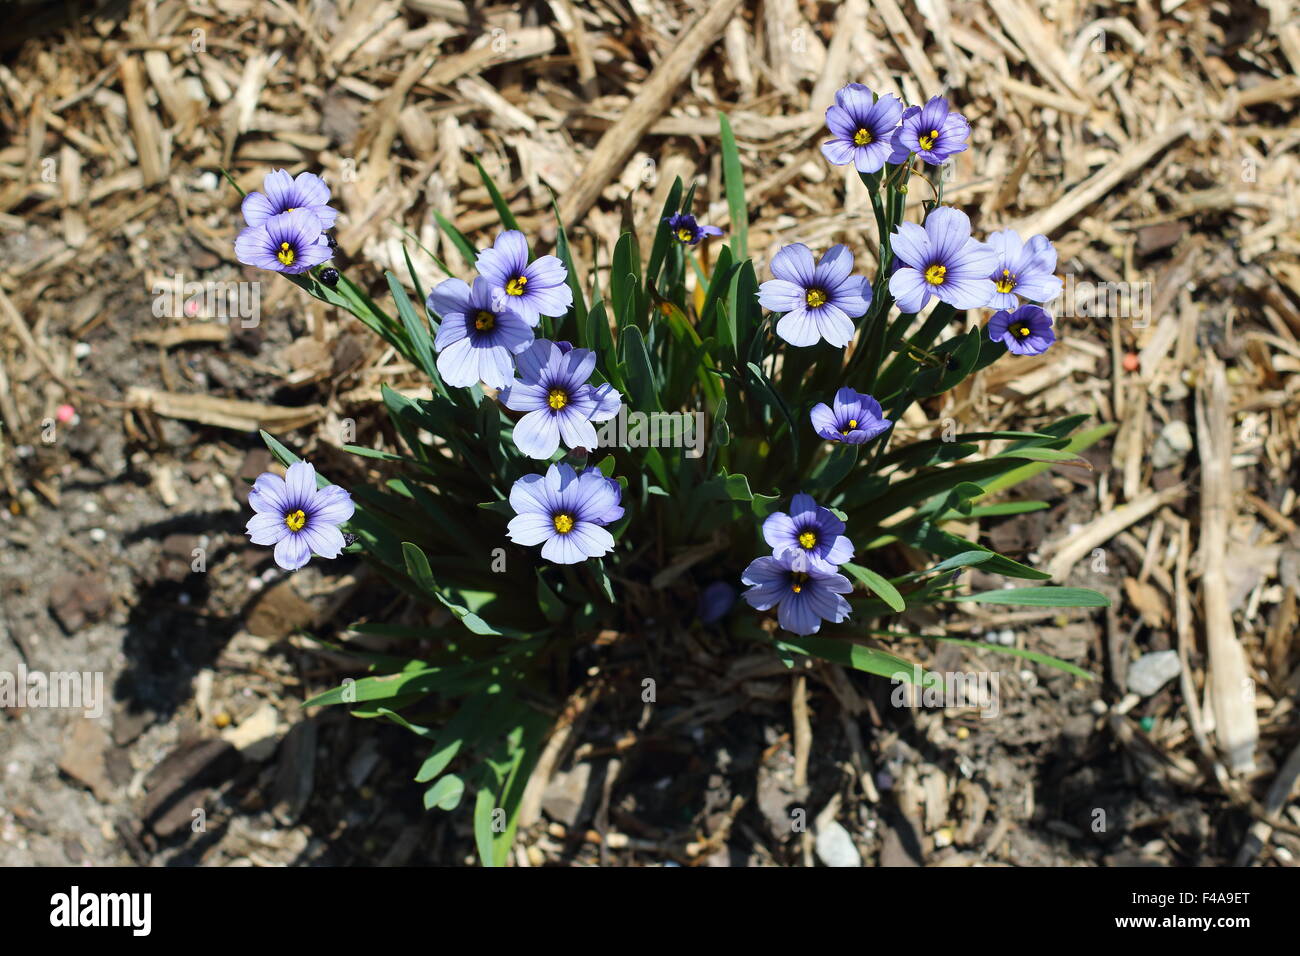 Sisyrinchium bellum or also known as Blue-Eyed Grass planted on the ground Stock Photo